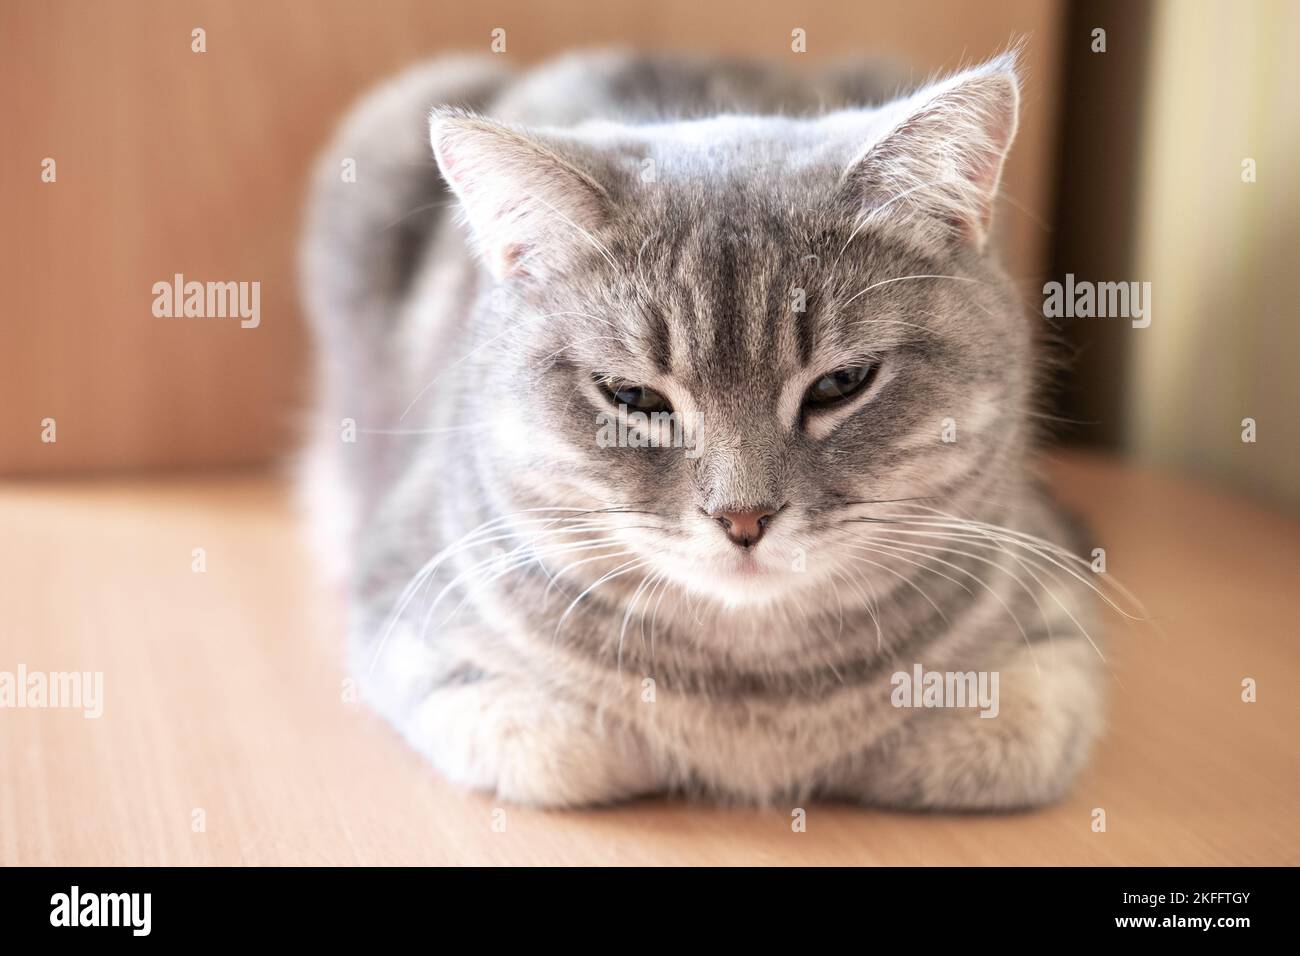 Sleeping gray fluffy tabby cat on the table, close-up, selective focus. Close-up of the muzzle of a beautiful gray cat. Stock Photo